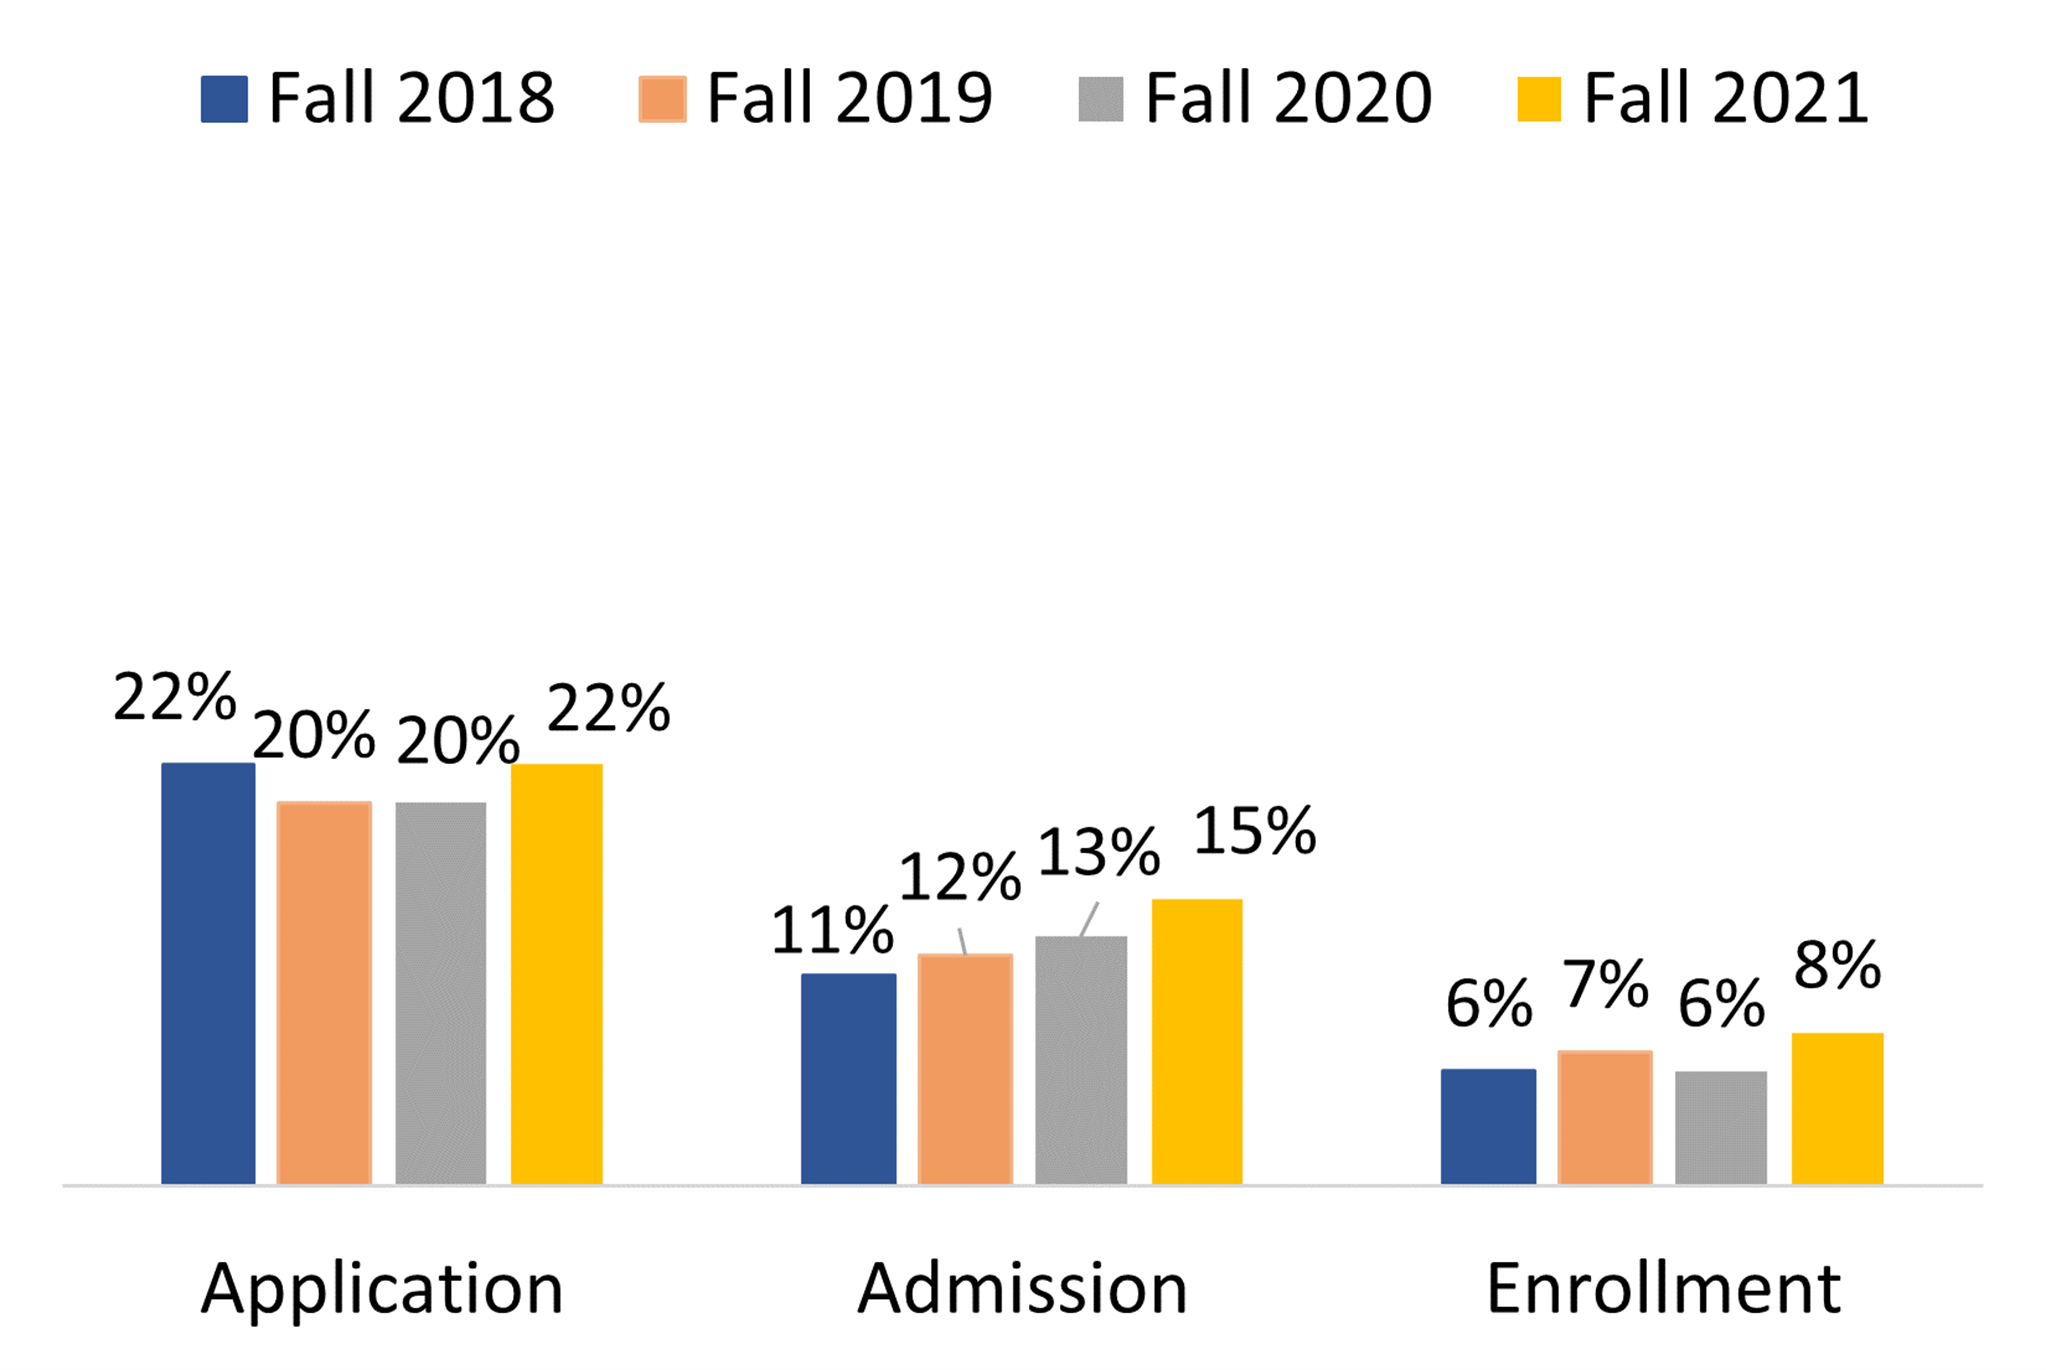 Three bar charts, each with values for Fall 2018, Fall 2019, Fall 2020, and Fall 2021. The application chart's percentages were 22% for 2018, 20% for 2019, 20% for 2020, and 22% for 2021. The admission chart's percentages were 11% for 2018, 12% for 2019, 13% for 2020, and 15% for 2021. The enrollment chart's percentages were 6% for 2018, 7% for 2019, 6% for 2020, and 8% for 2021.